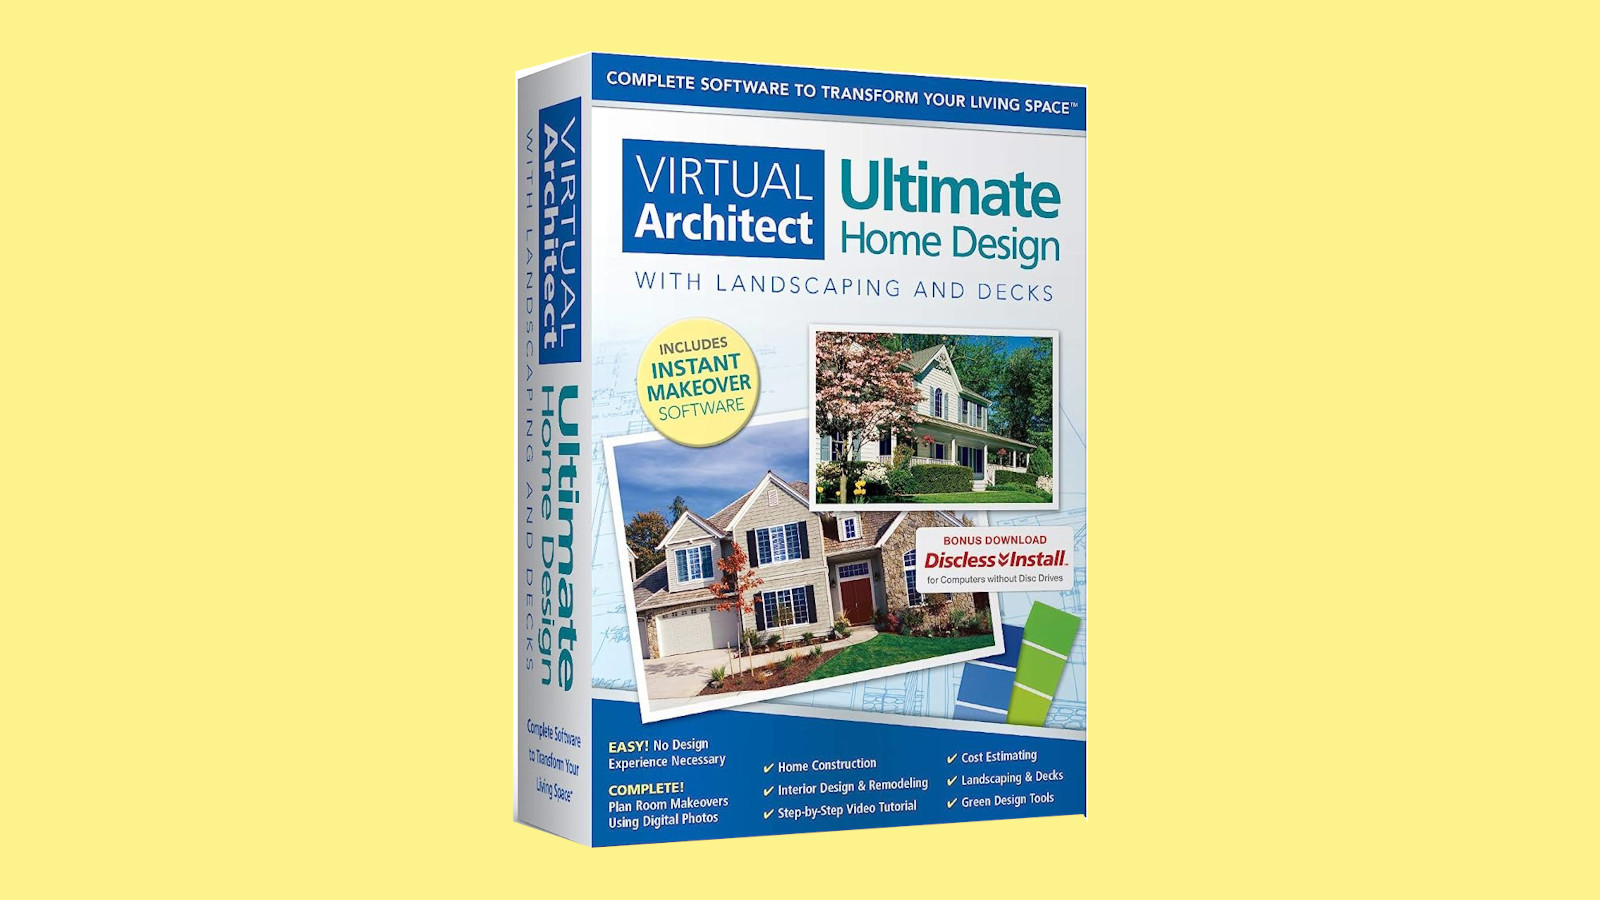 Virtual Architect Ultimate Home Design with Landscaping and Decks CD Key 77.68 USD